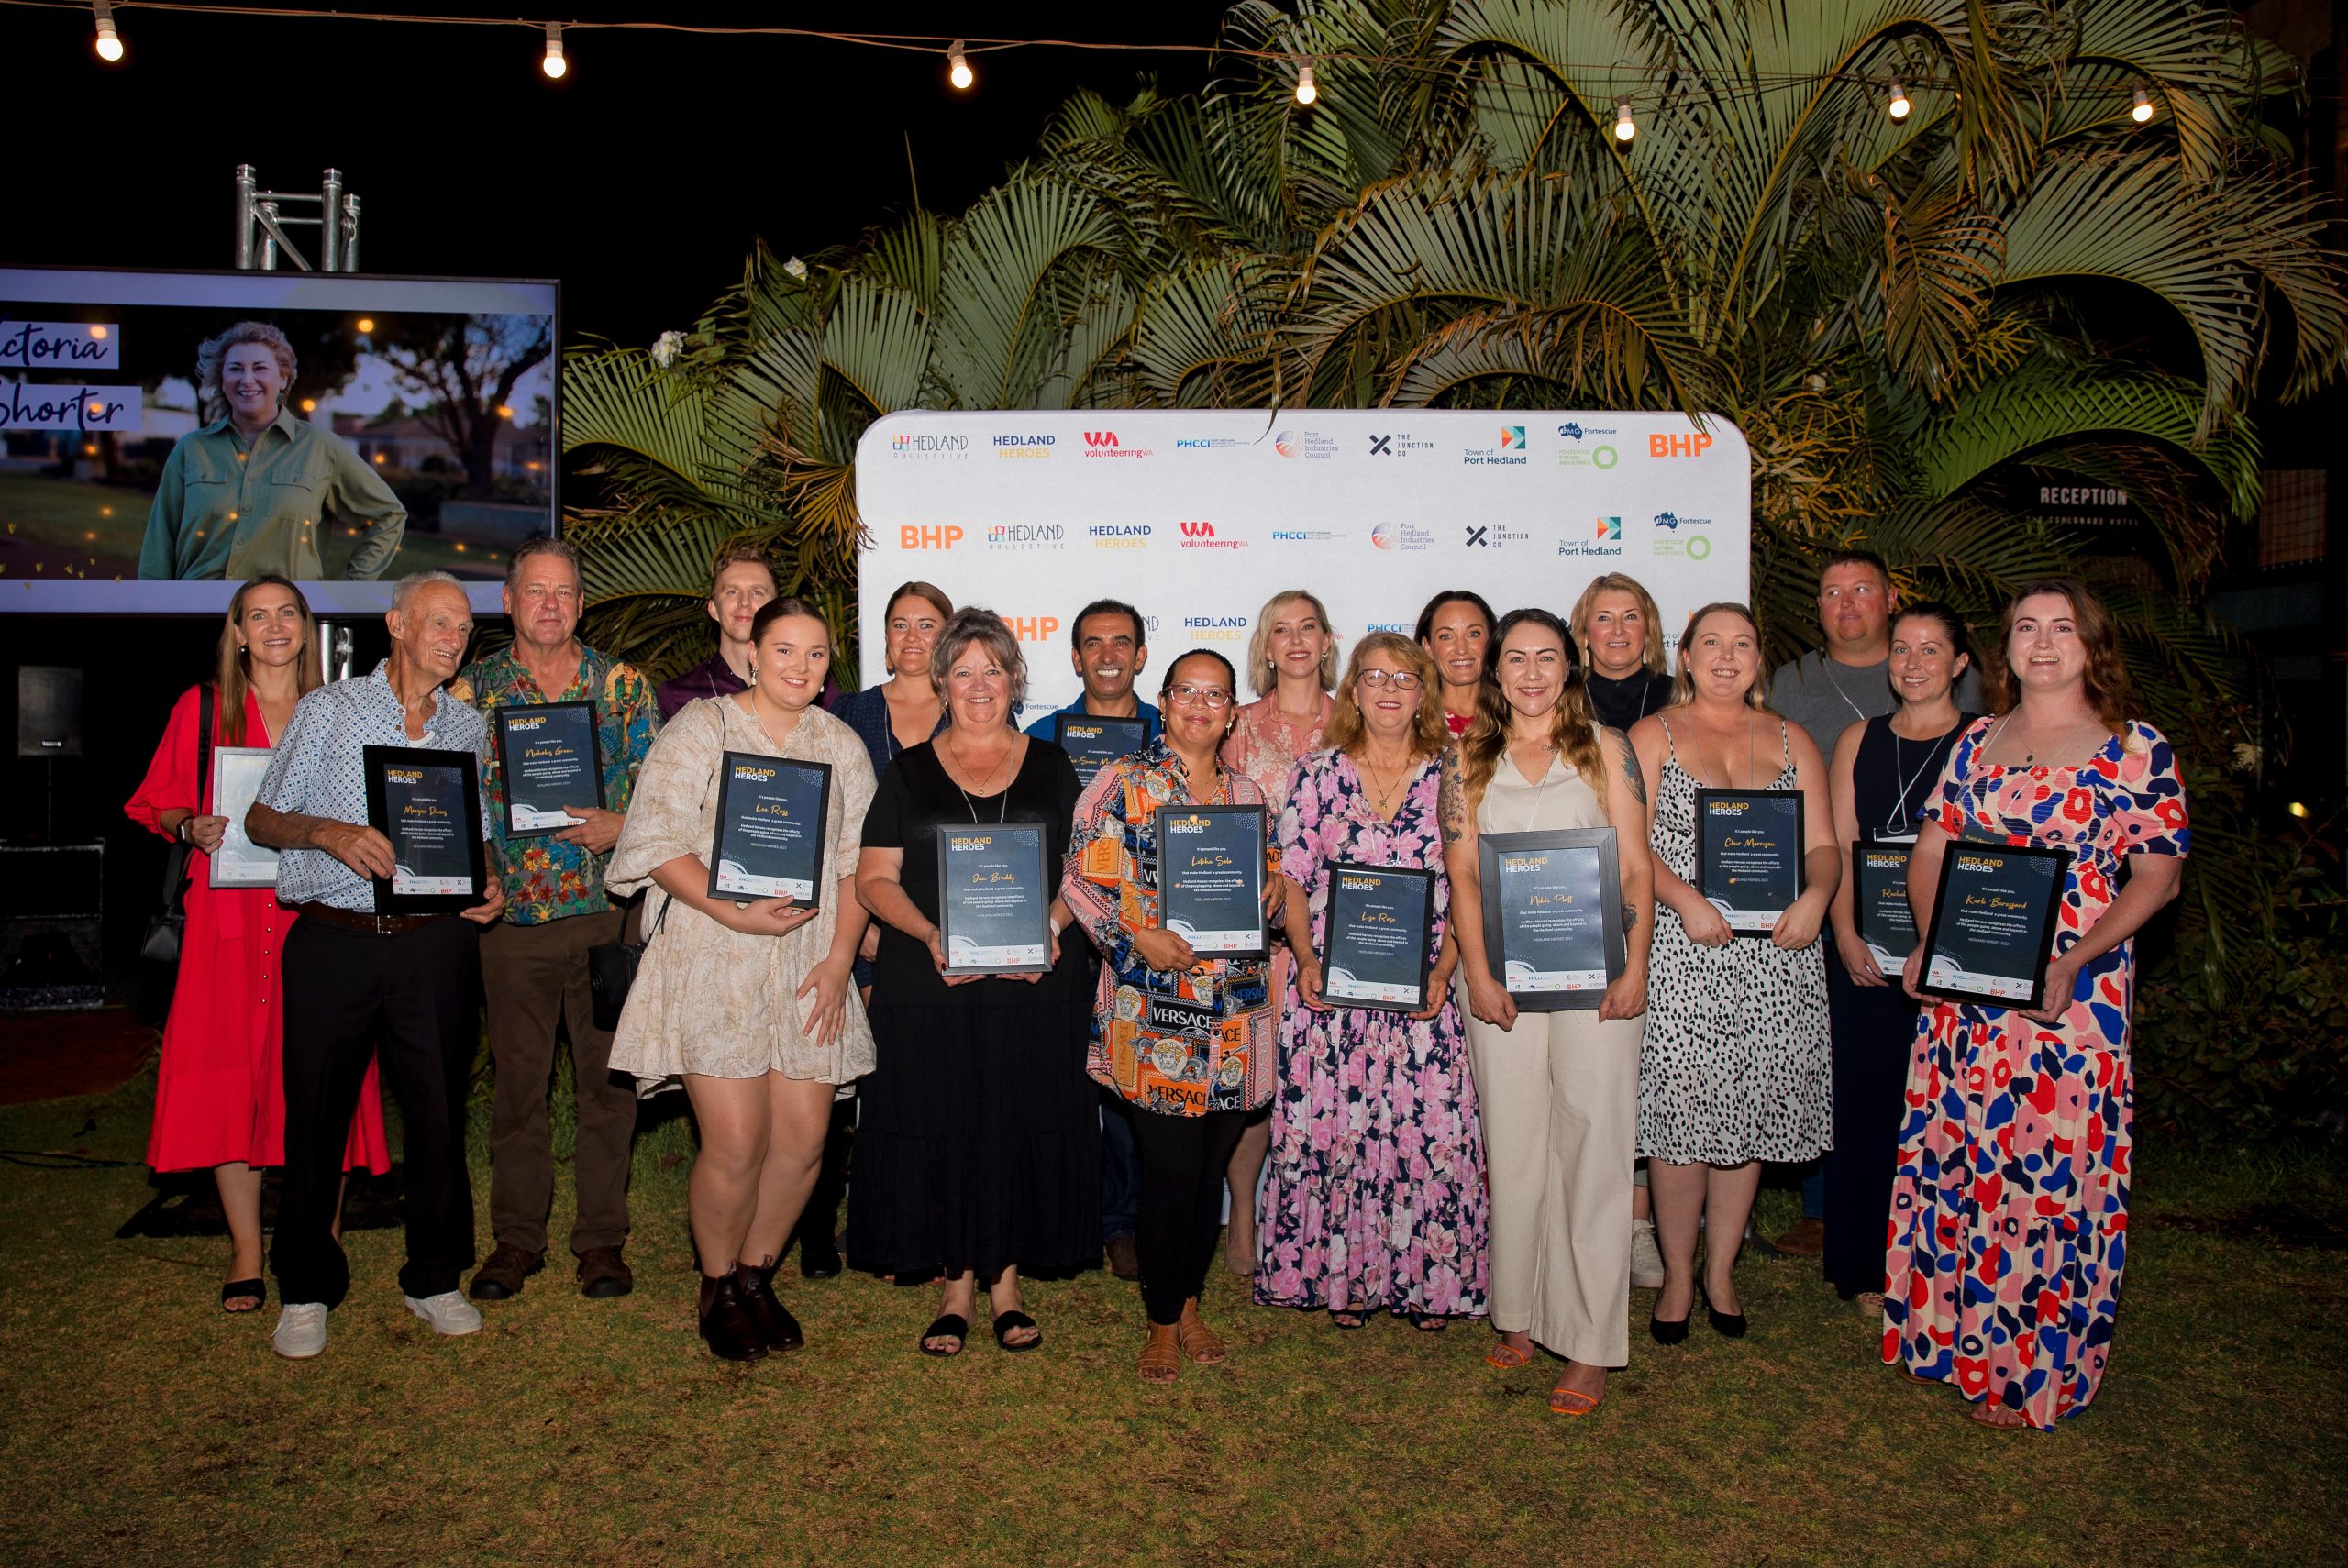 Highlights from our Hedland Heroes event!